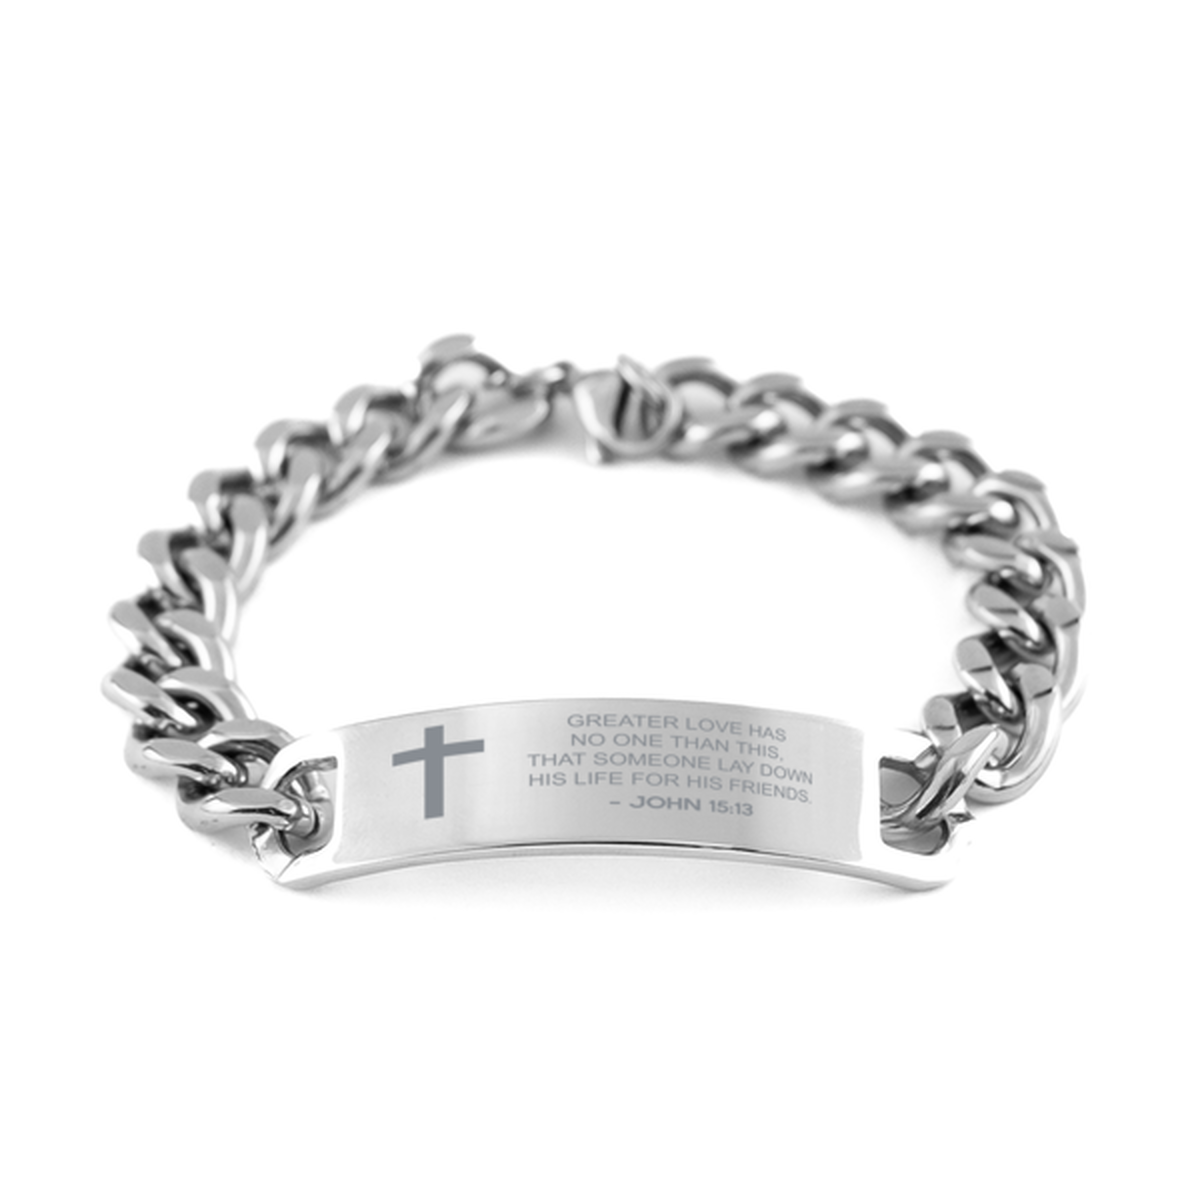 Bible Verse Chain Stainless Steel Bracelet, John 15:13 Greater Love Has No One Than This, That Someone, Inspirational Christian Gifts For Men Women